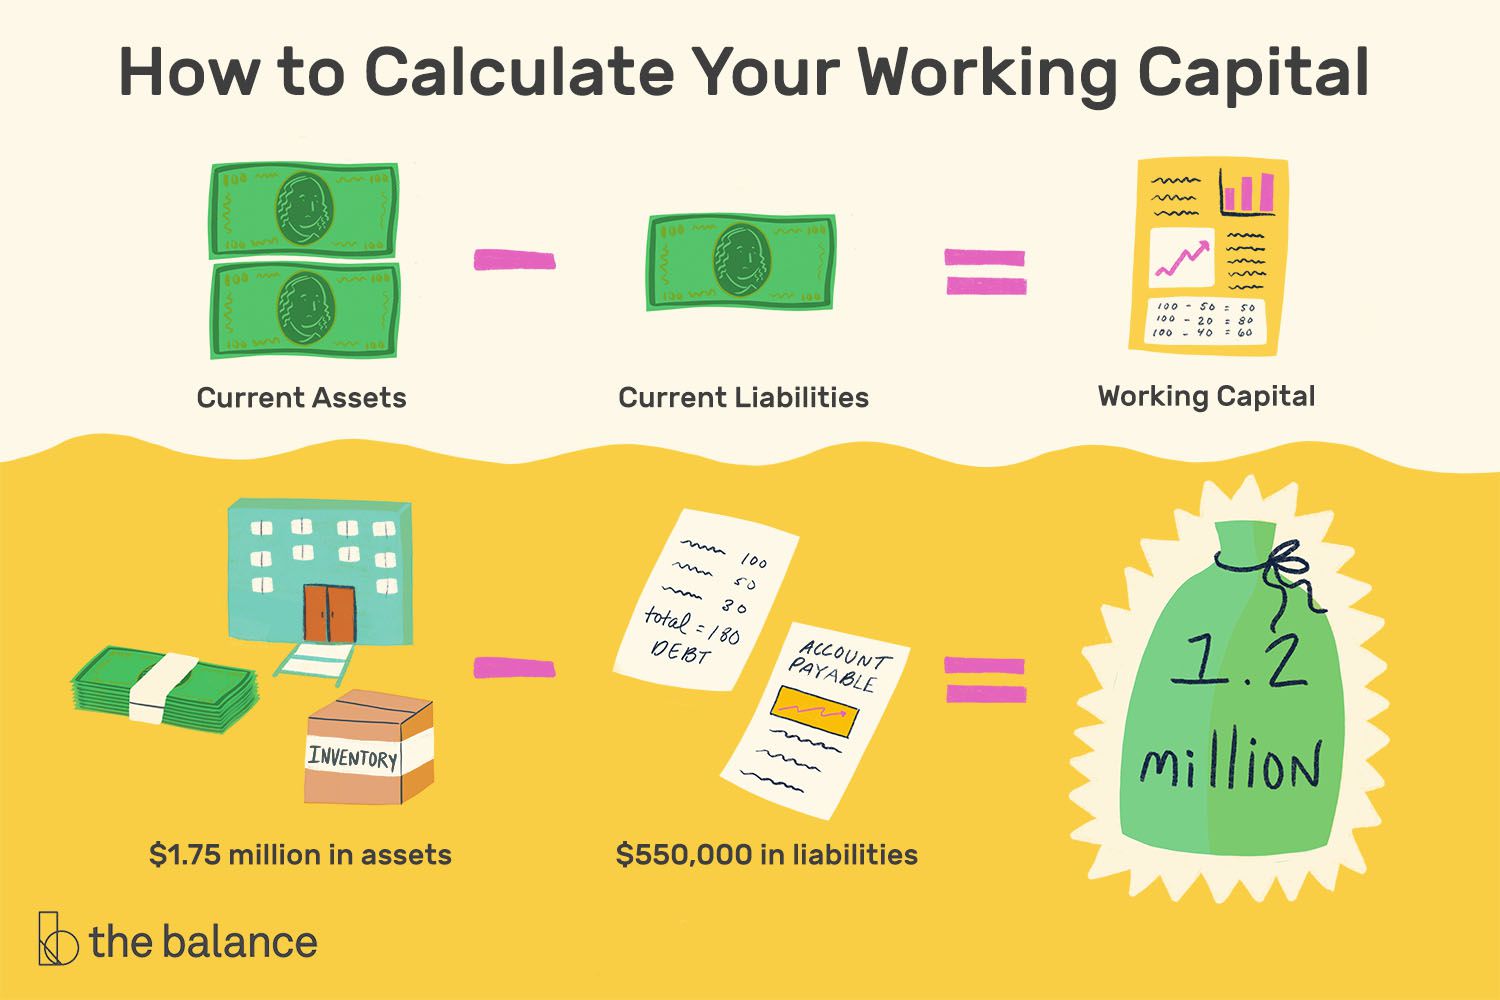 What Is Working Capital?